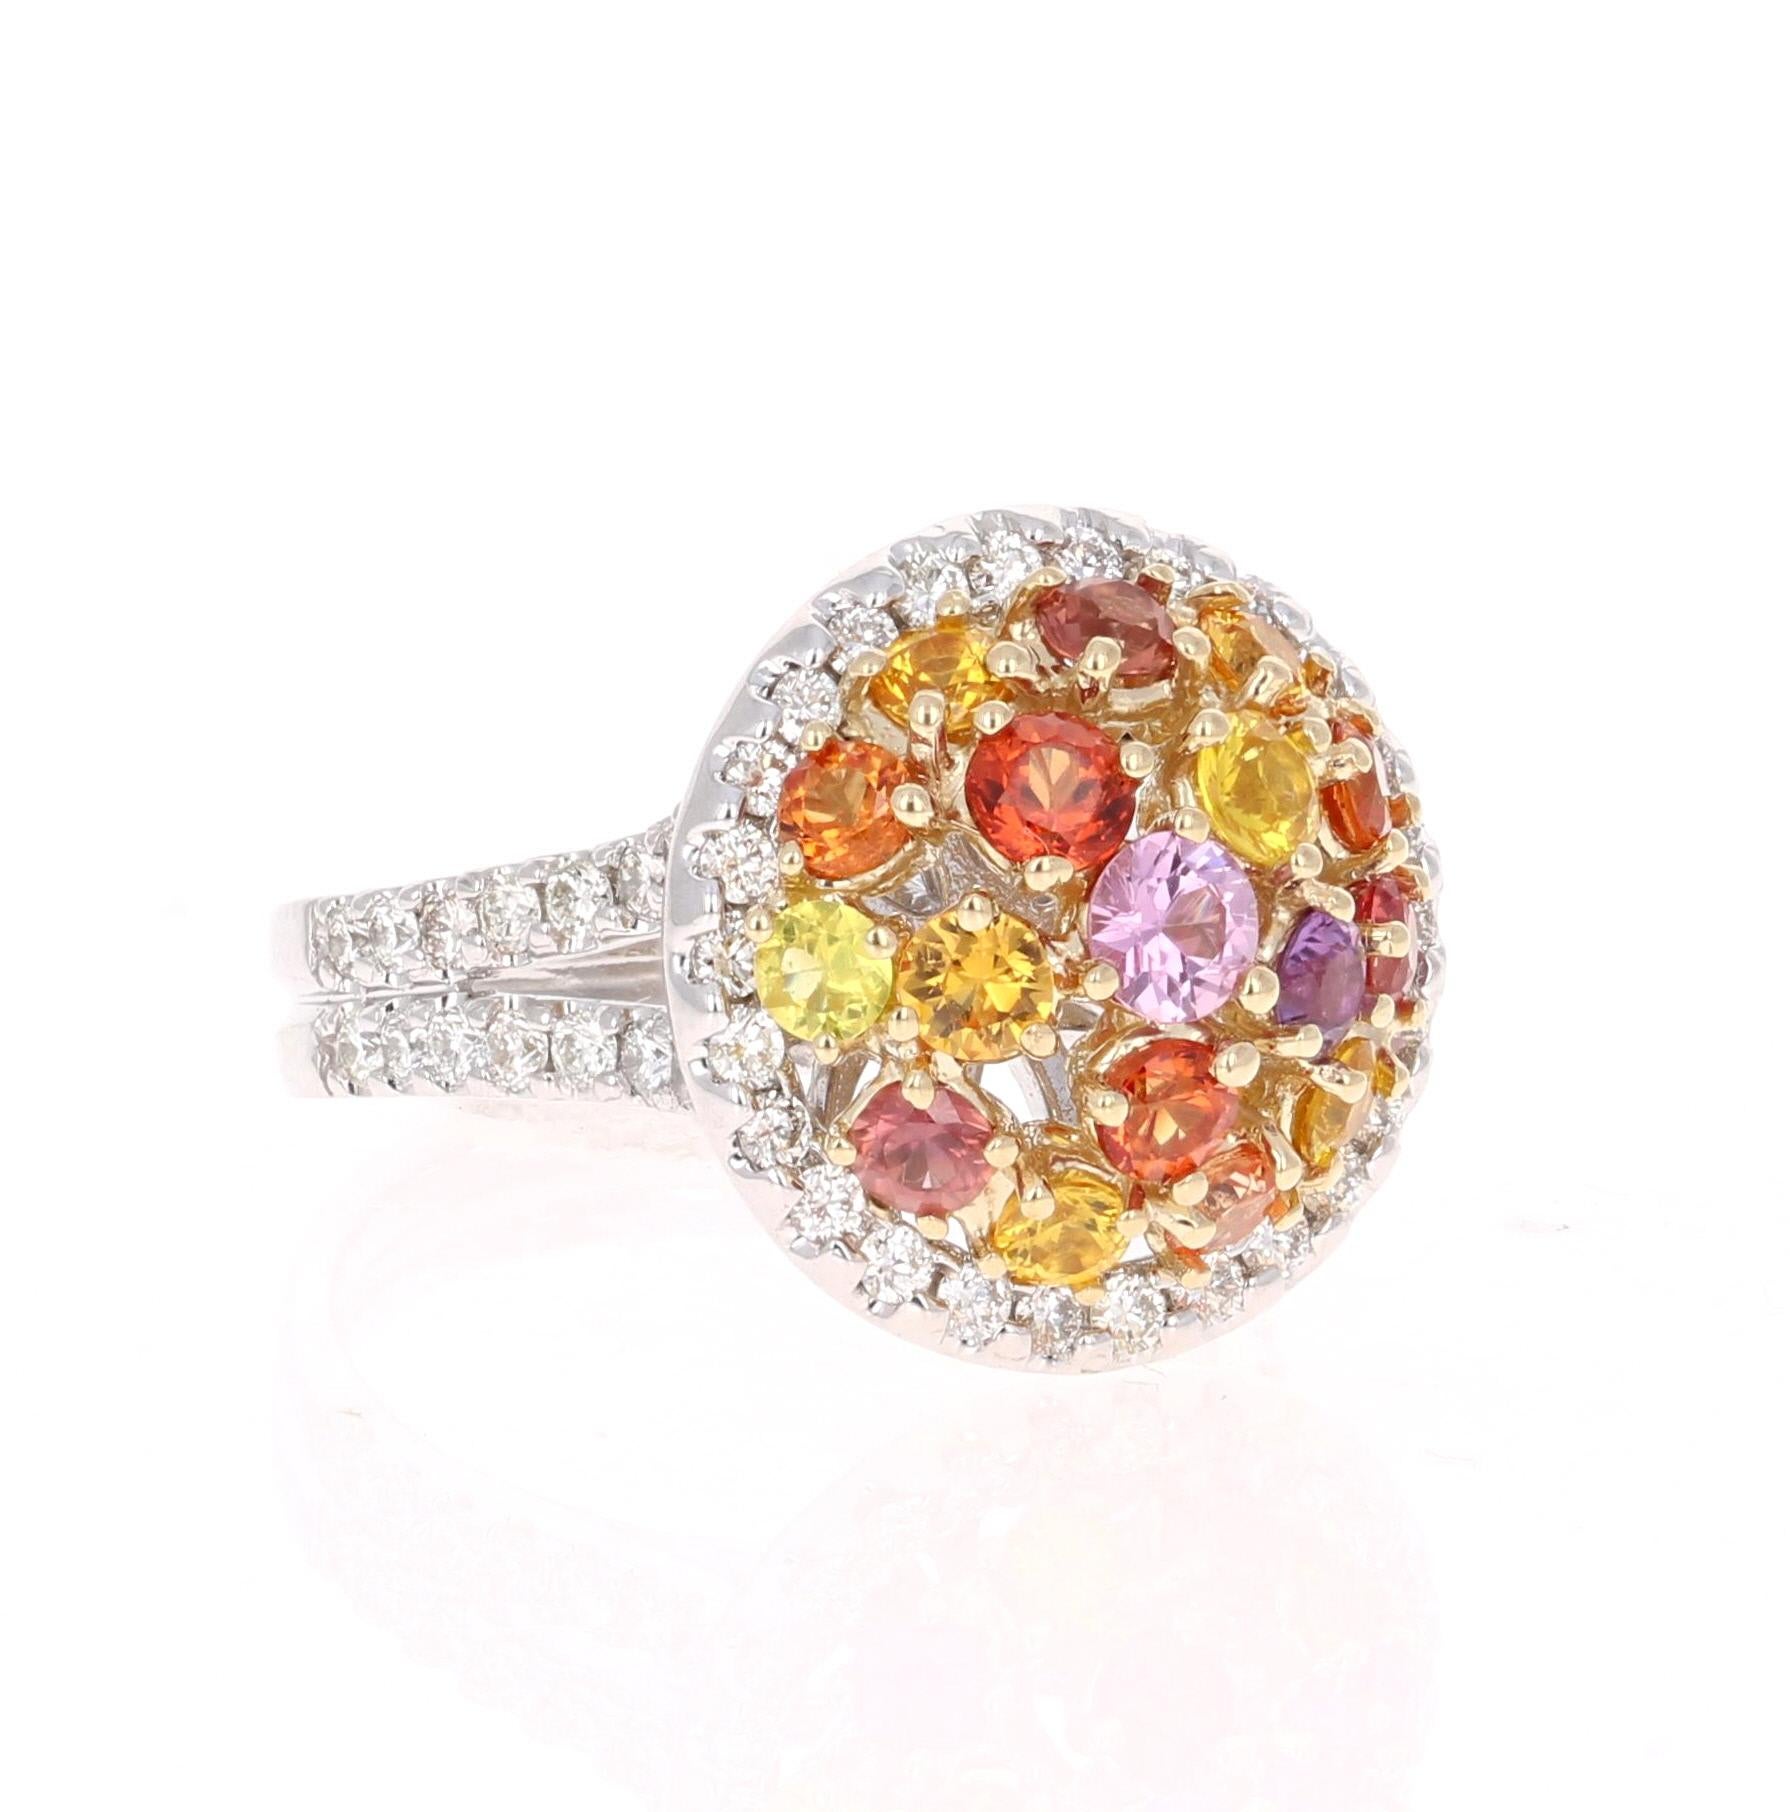 Super gorgeous and uniquely designed 2.70 Carat Multi-Colored Sapphire and Diamond 14K White Gold Cocktail Ring!

This ring has a cluster of 17 Round Cut Multi-Colored Sapphires that weigh 1.87 carats and 54 Round Cut Diamonds that weigh 0.83 carats